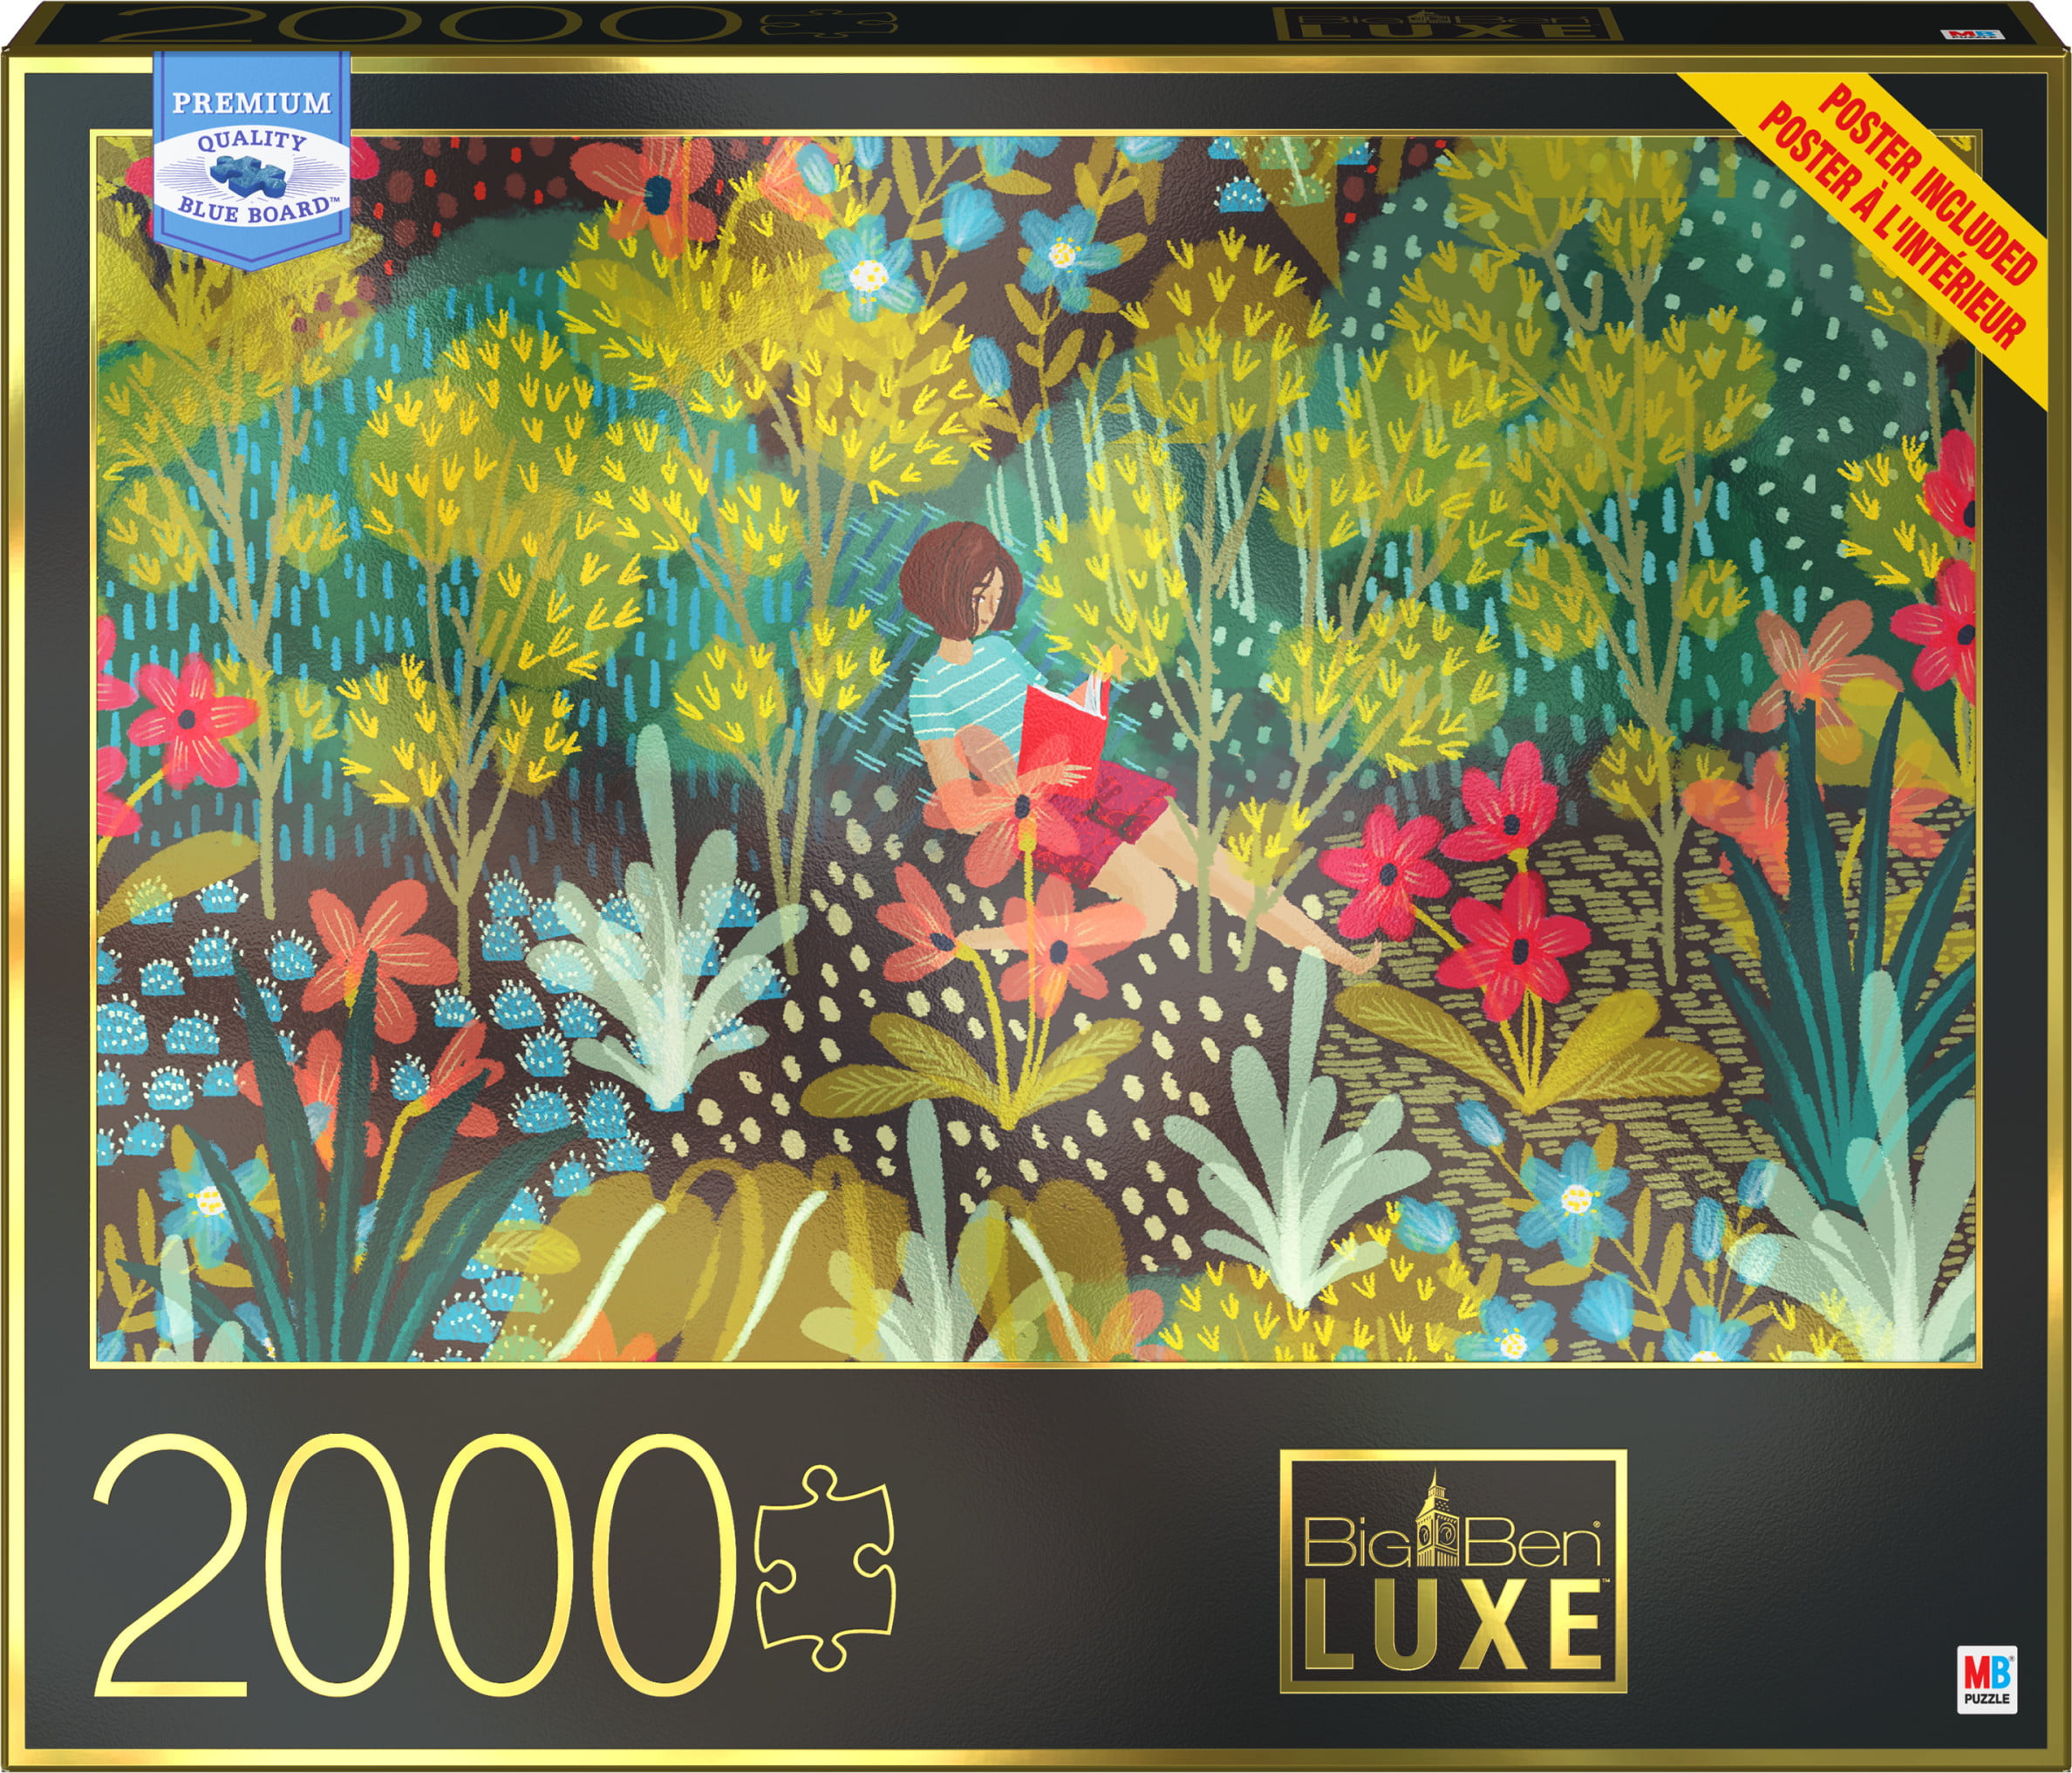 Jigsaw Puzzles 2000 Pieces for Adults and Kids flowerJigsaw Puzzles 2000 Pieces for AdultsKids Puzzle Puzzles Kids DIY Toys Gift for Home Decor